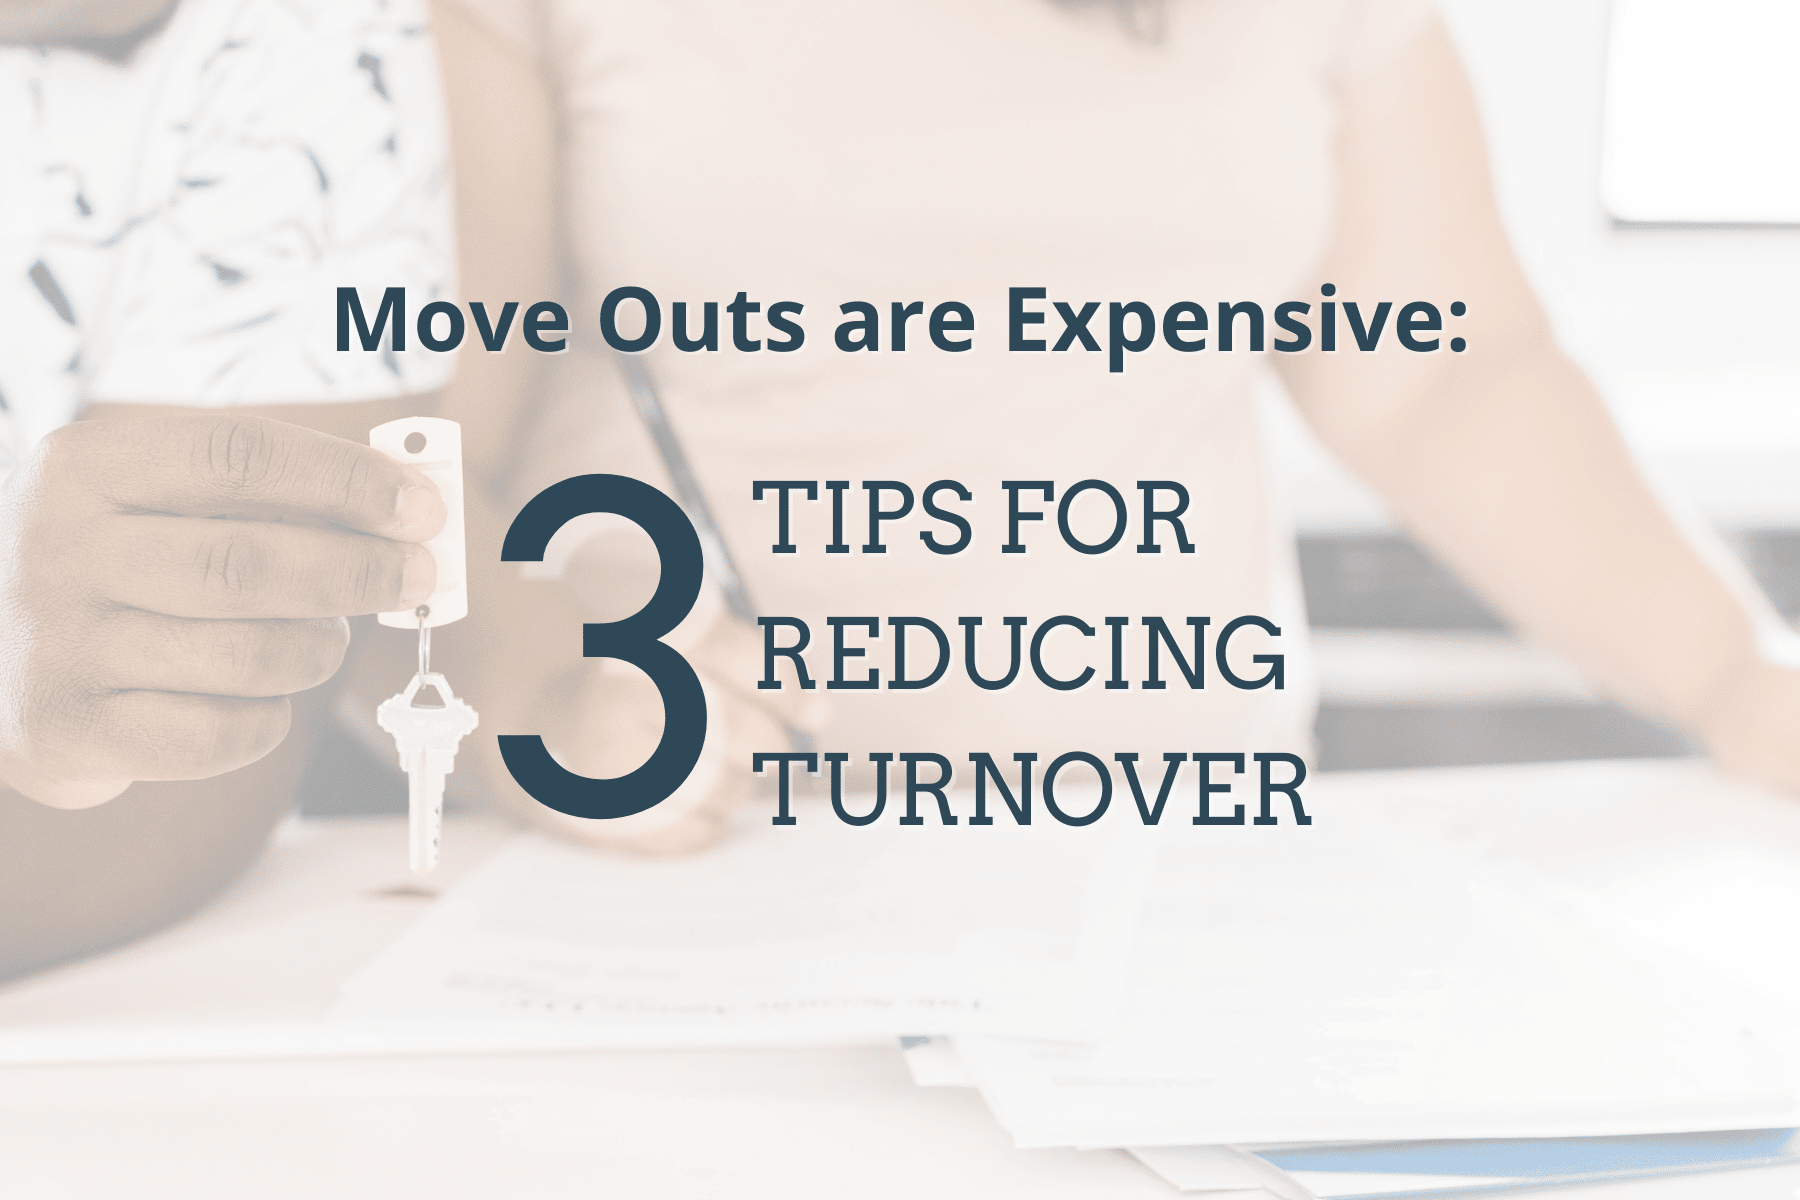 Handing over the Keys. Move Outs are Expensive: 3 Tips for Reducing Turnover